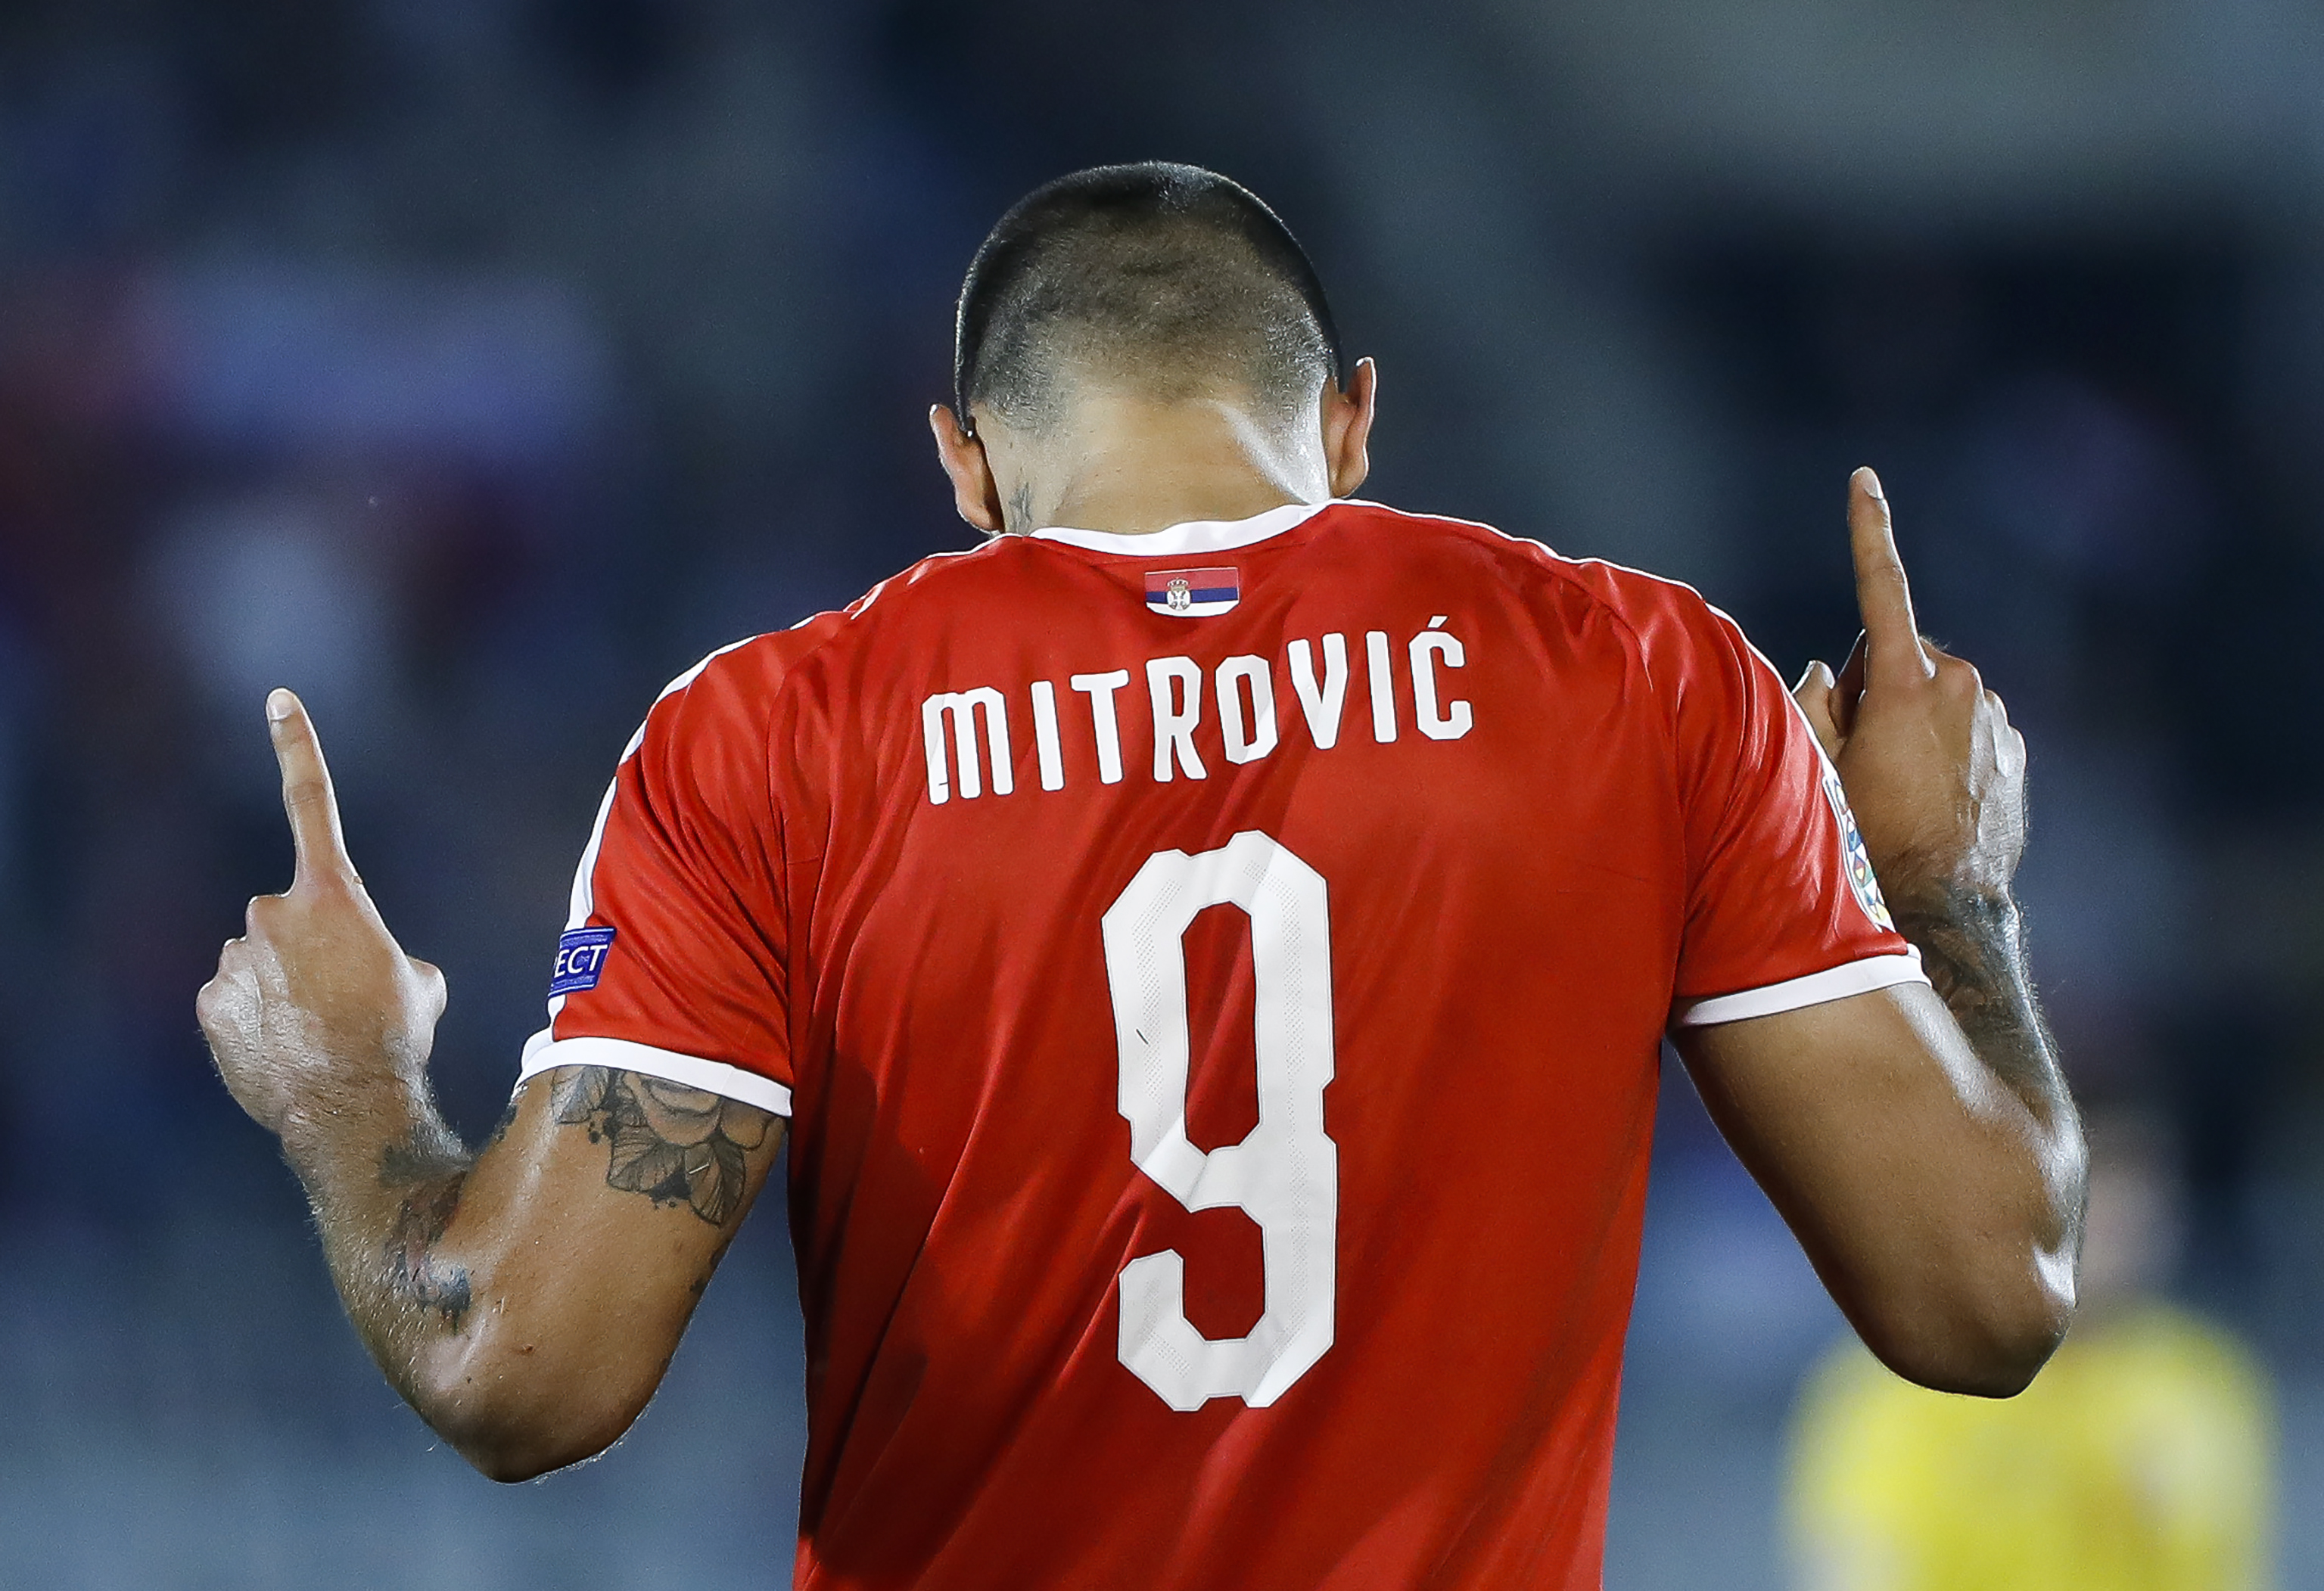 BELGRADE, SERBIA - SEPTEMBER 10: Aleksandar Mitrovic of Serbia celebrates after scores the goal during the UEFA Nations League C group four match between Serbia and Romania at stadium Partizan on September 10, 2018 in Belgrade, Serbia. (Photo by Srdjan Stevanovic/Getty Images)